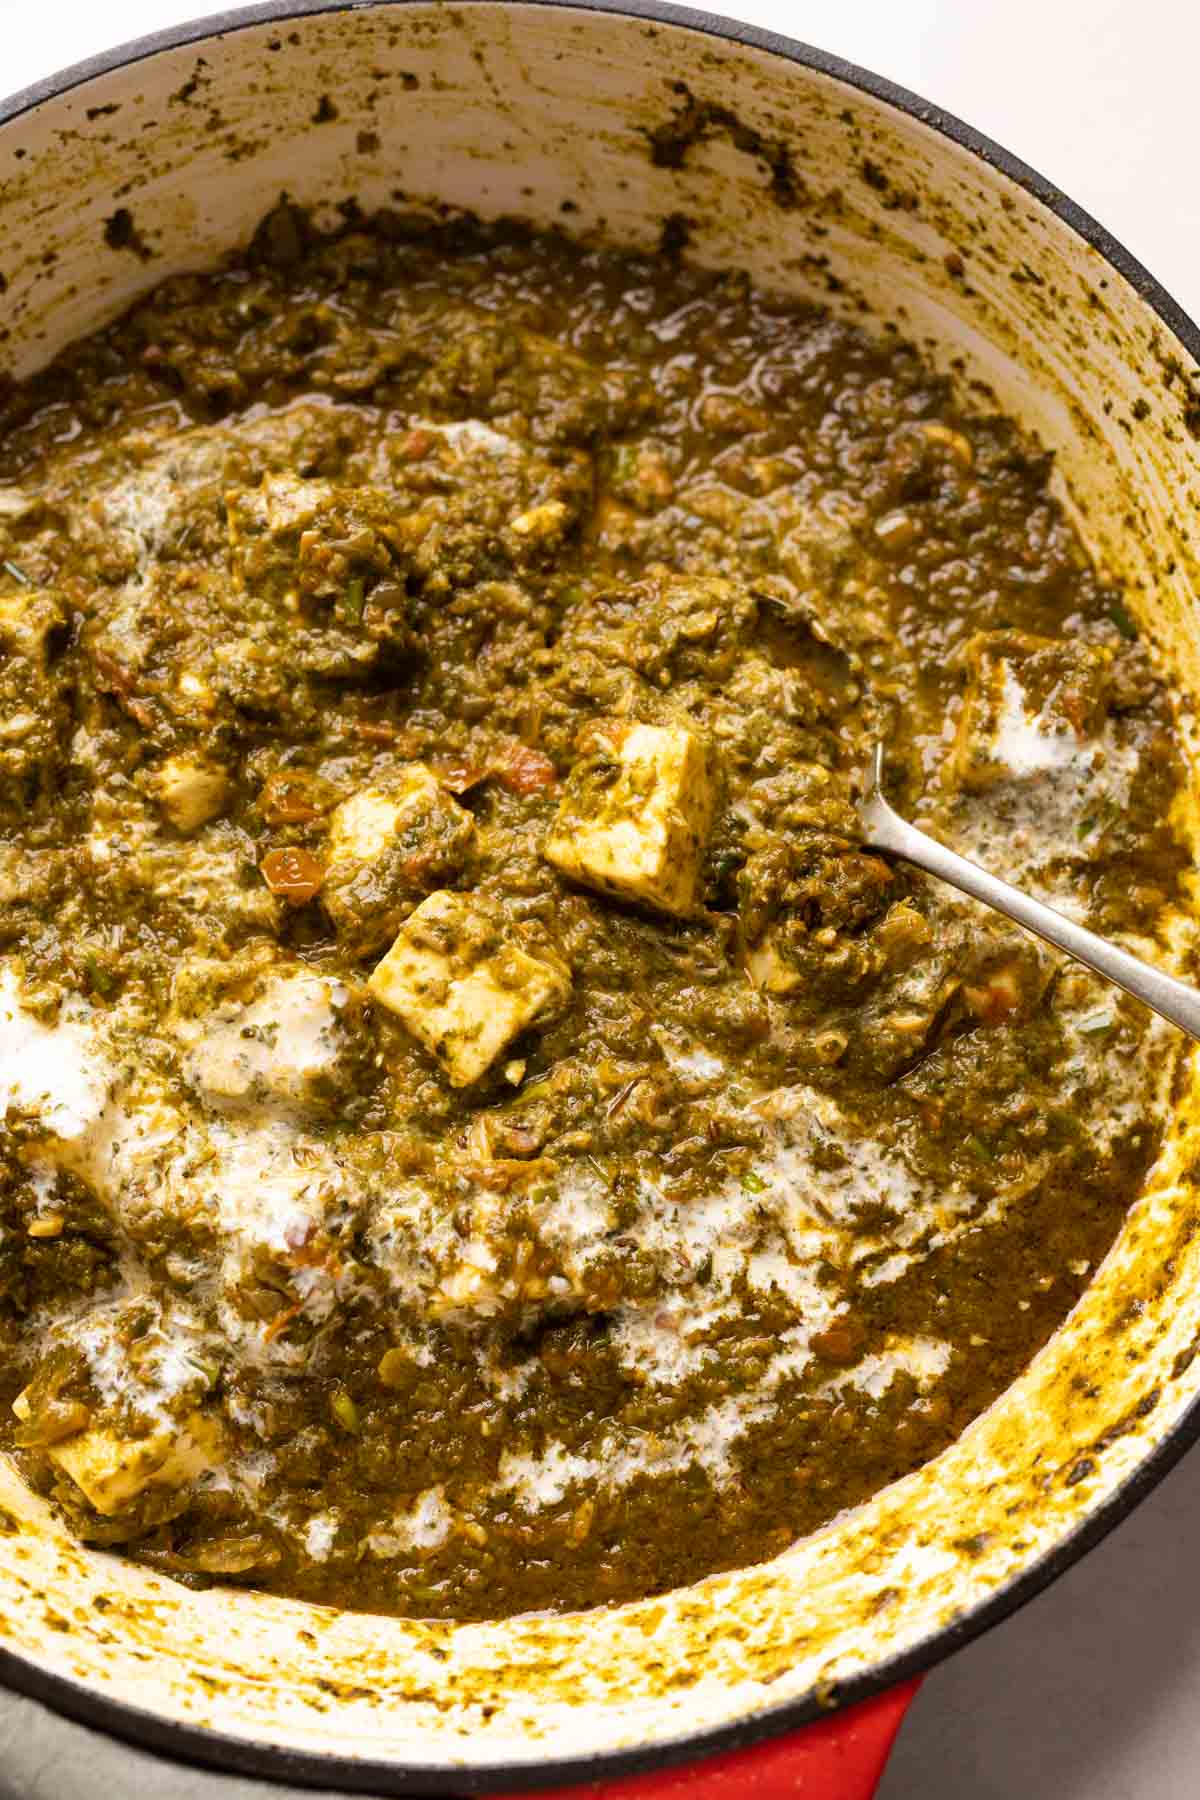 Picture of saag paneer in the pan that it was cooked in with a spoon